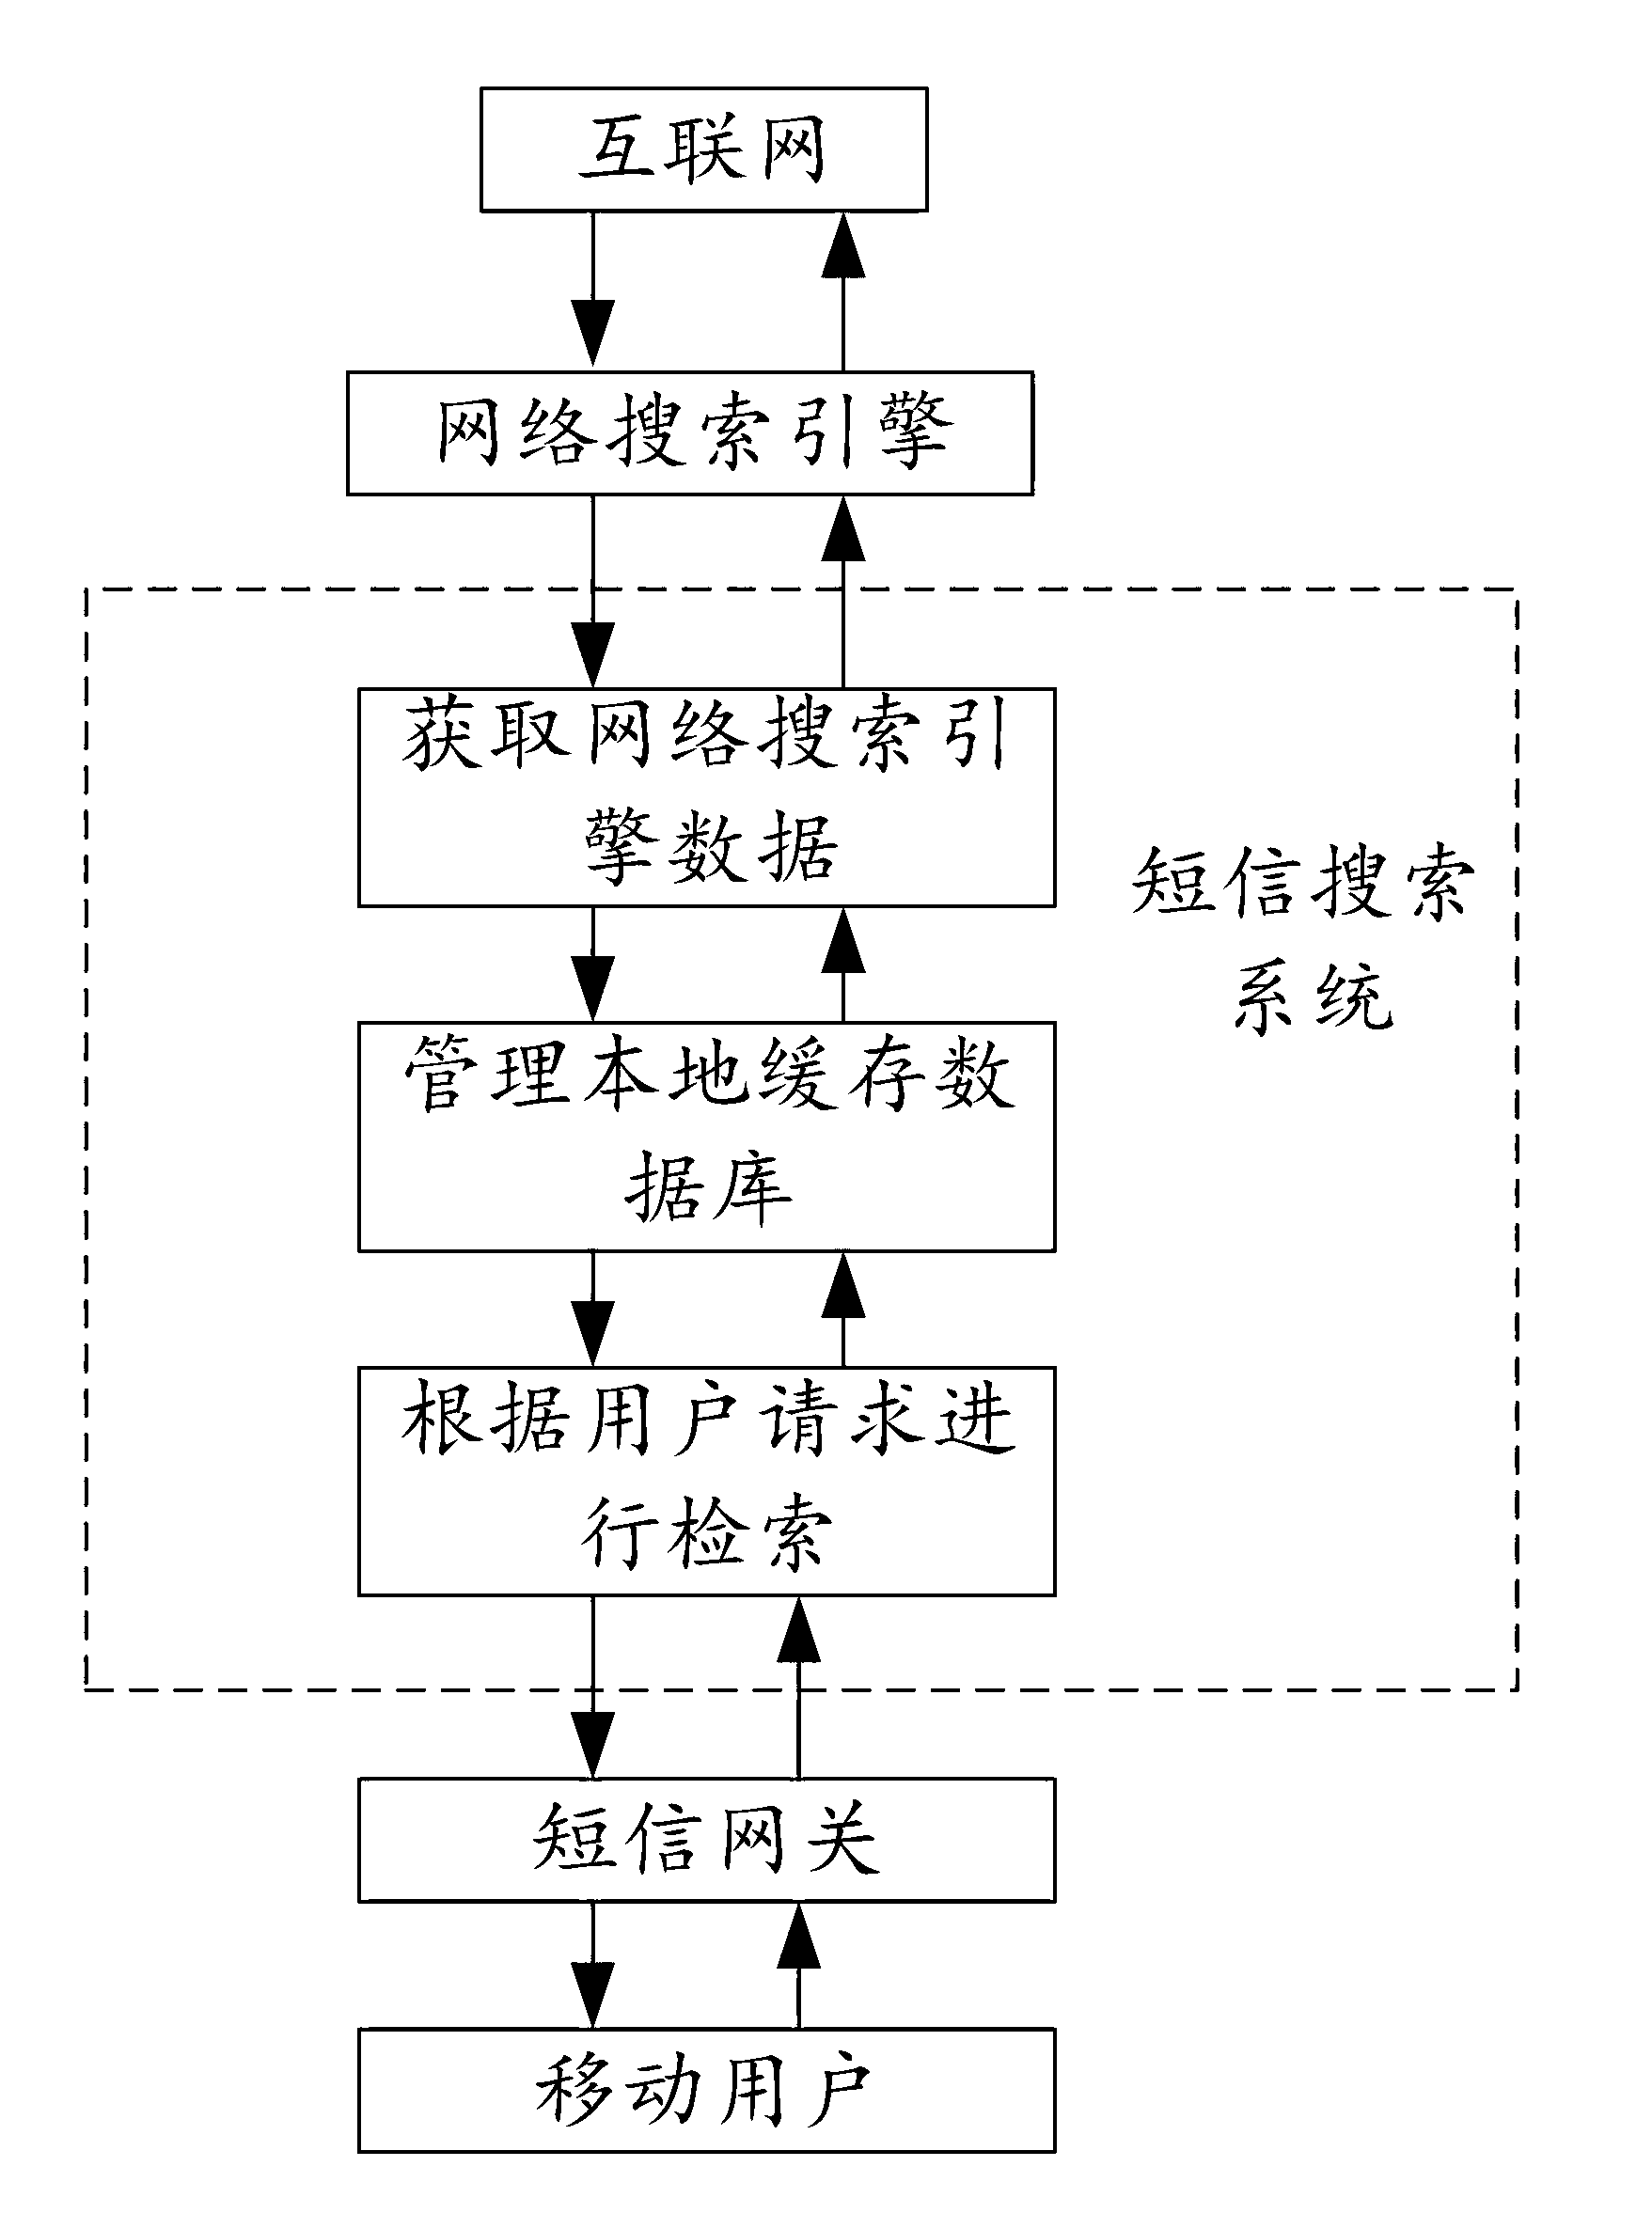 System and method for mobile internet searching system based on messages